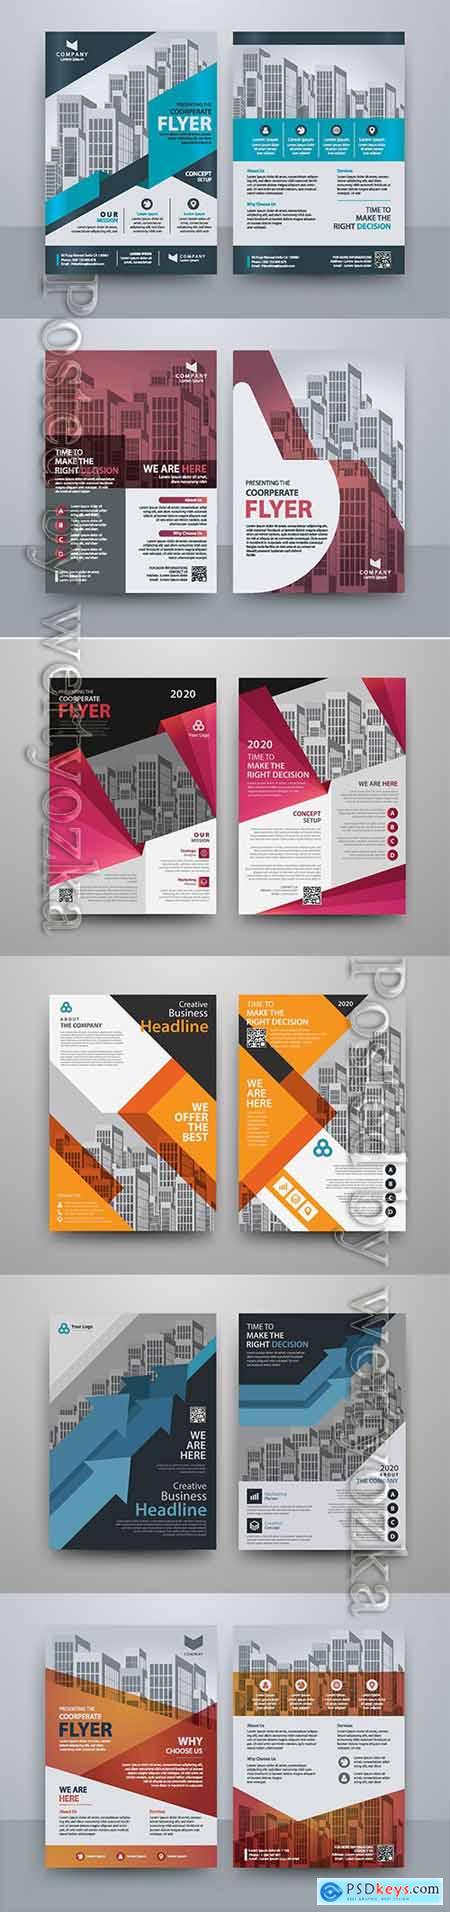 Business vector template for brochure, annual report, magazine # 14